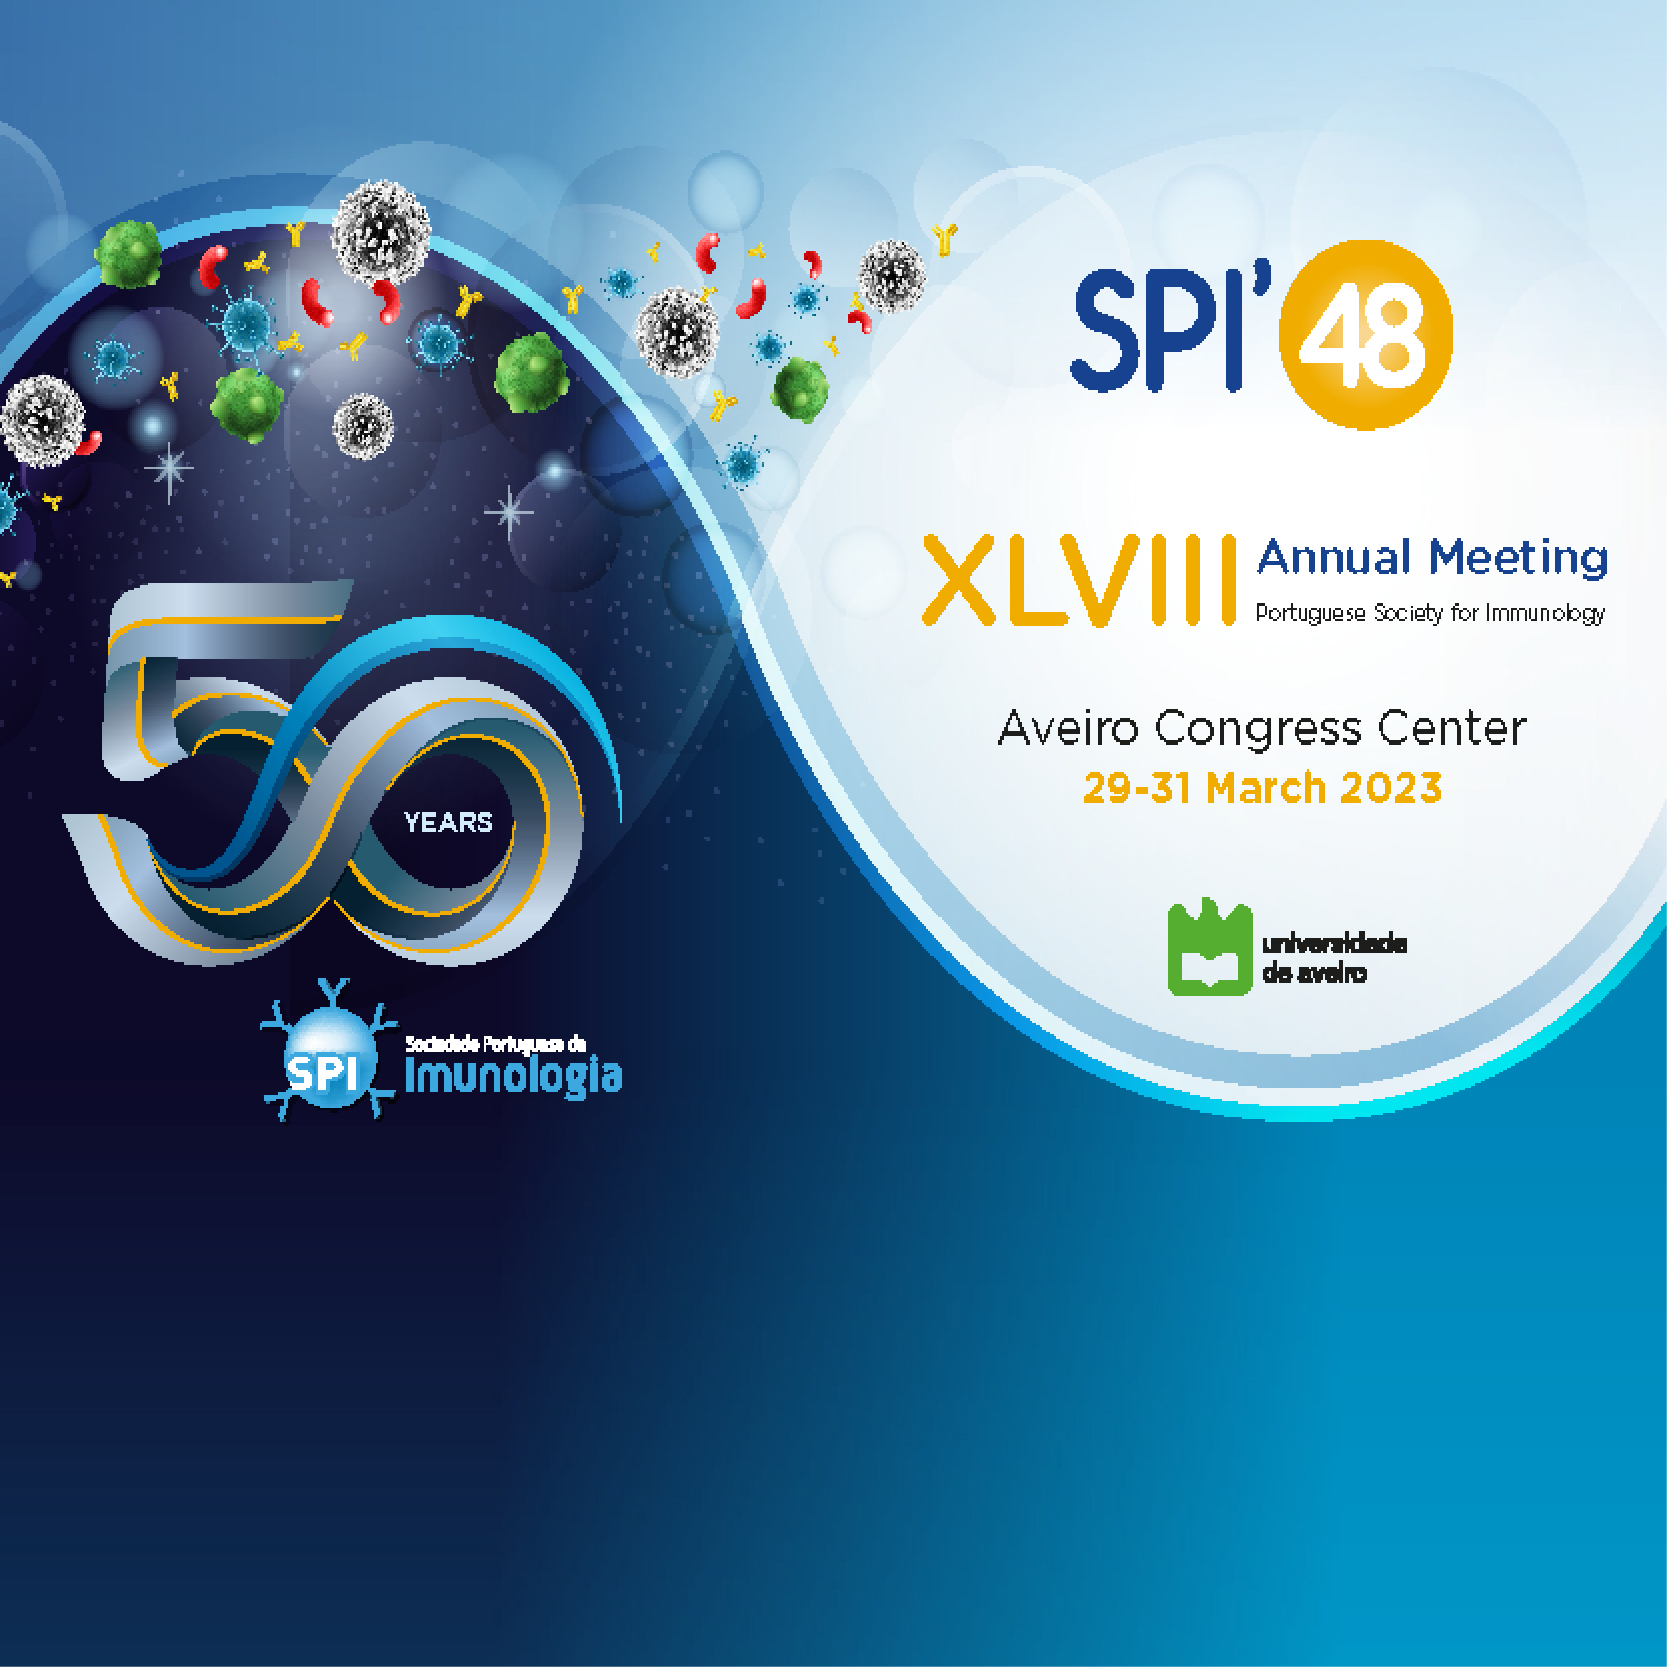 The 48TH Annual Meeting of the Portuguese Society for Immunology - SPI 2023